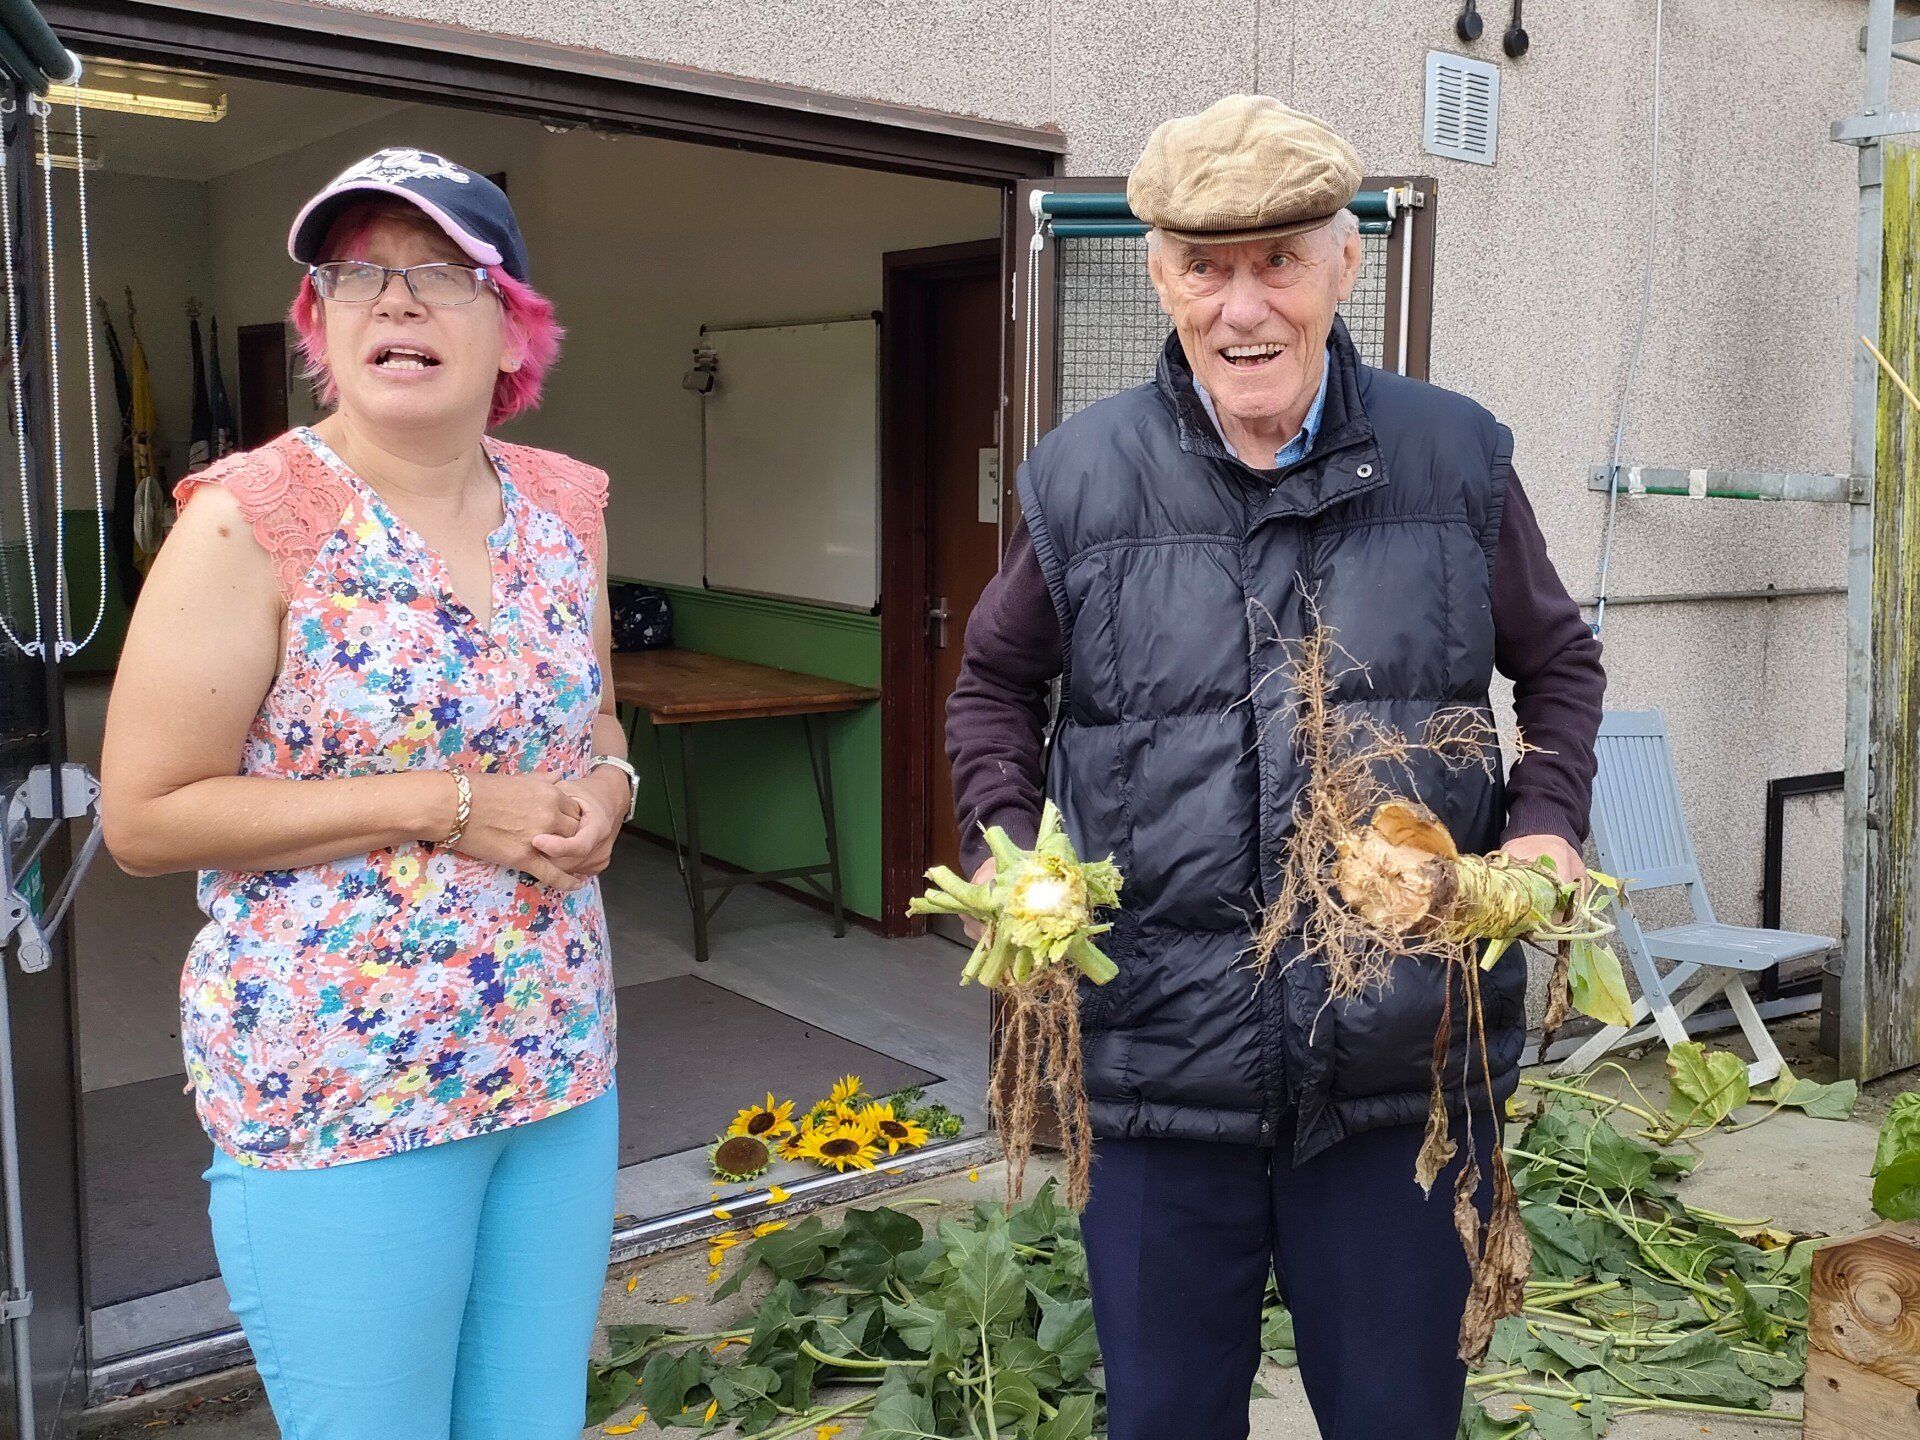 Two smiling members stood just outside one with sunflower roots in hand. In the background,  lay sunflower harvested sunflower stems and carefully selected sunflower heads